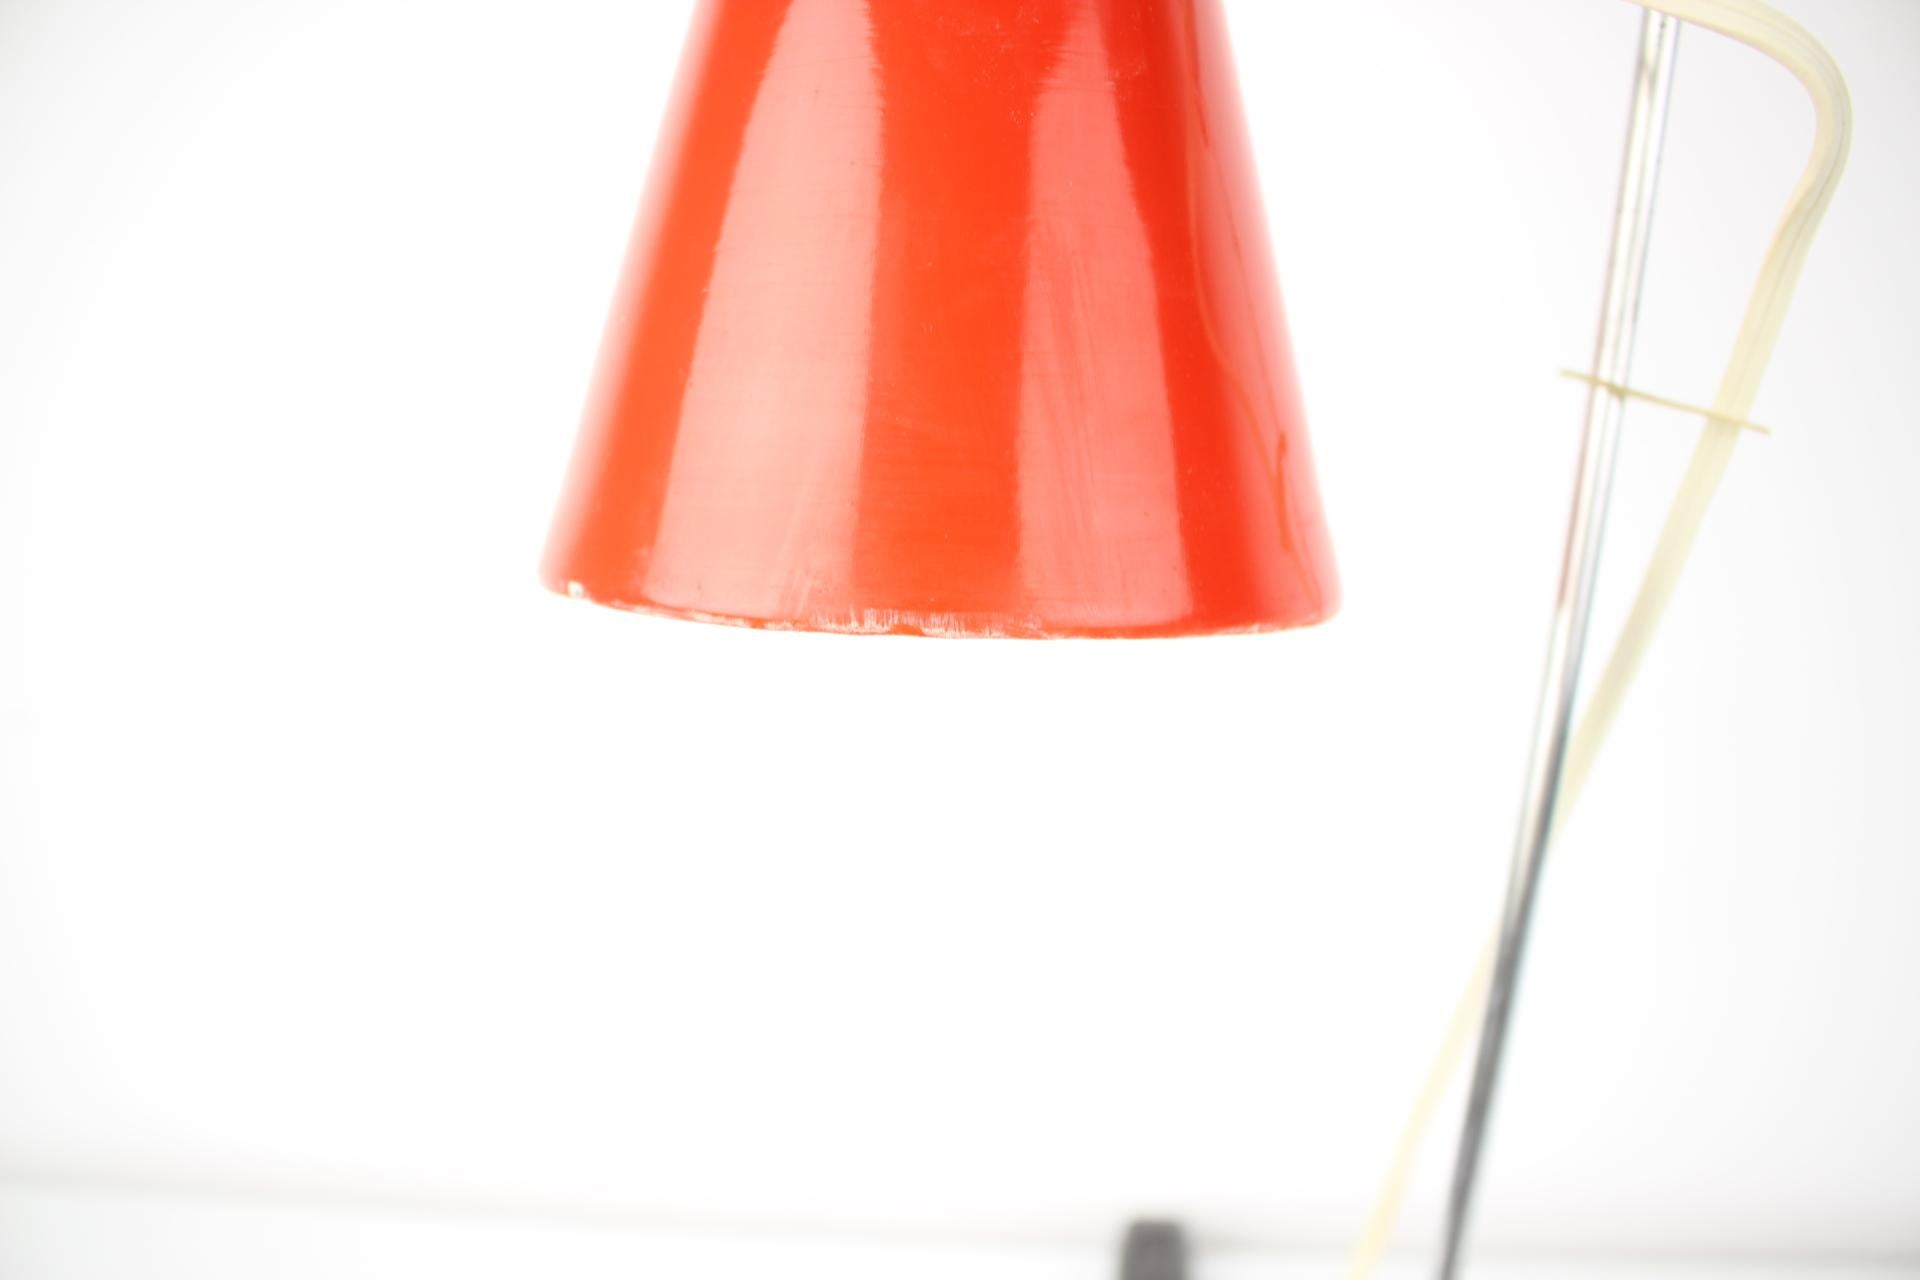 Czech Midcentury Red Table Lamp Designed by Josef Hurka, 1960s For Sale